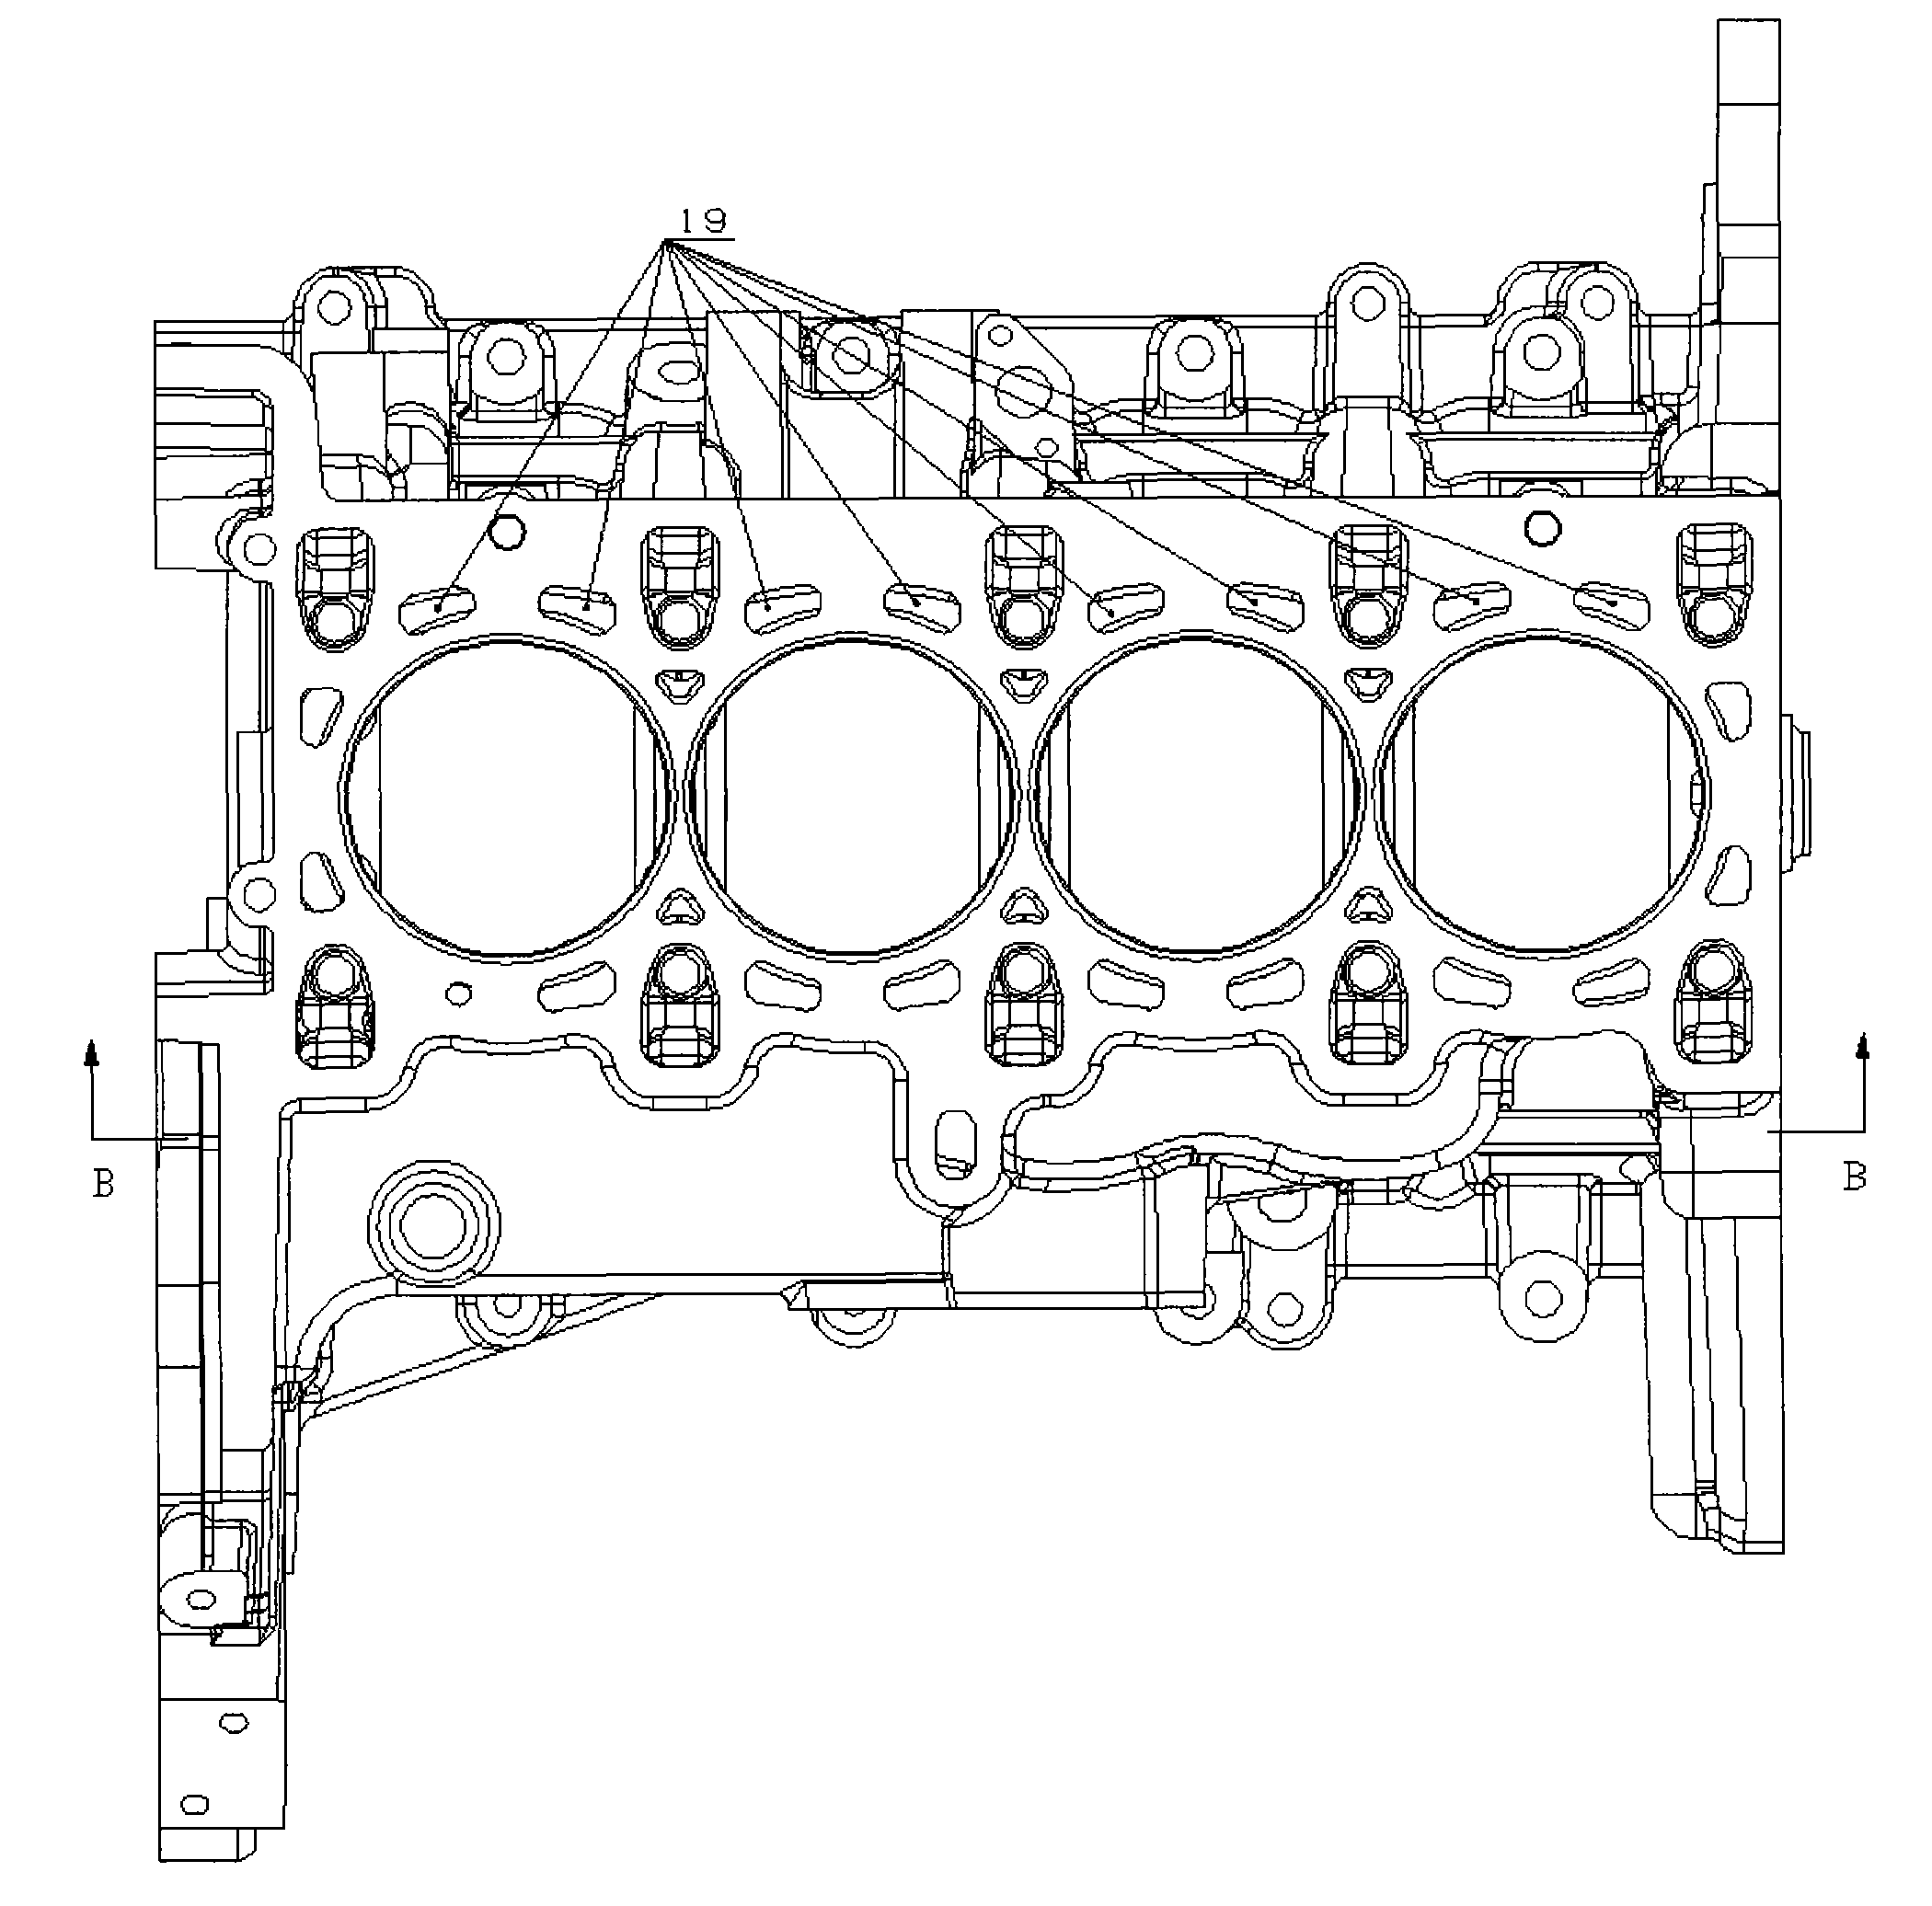 Cylinder cooling water channel structure and engine